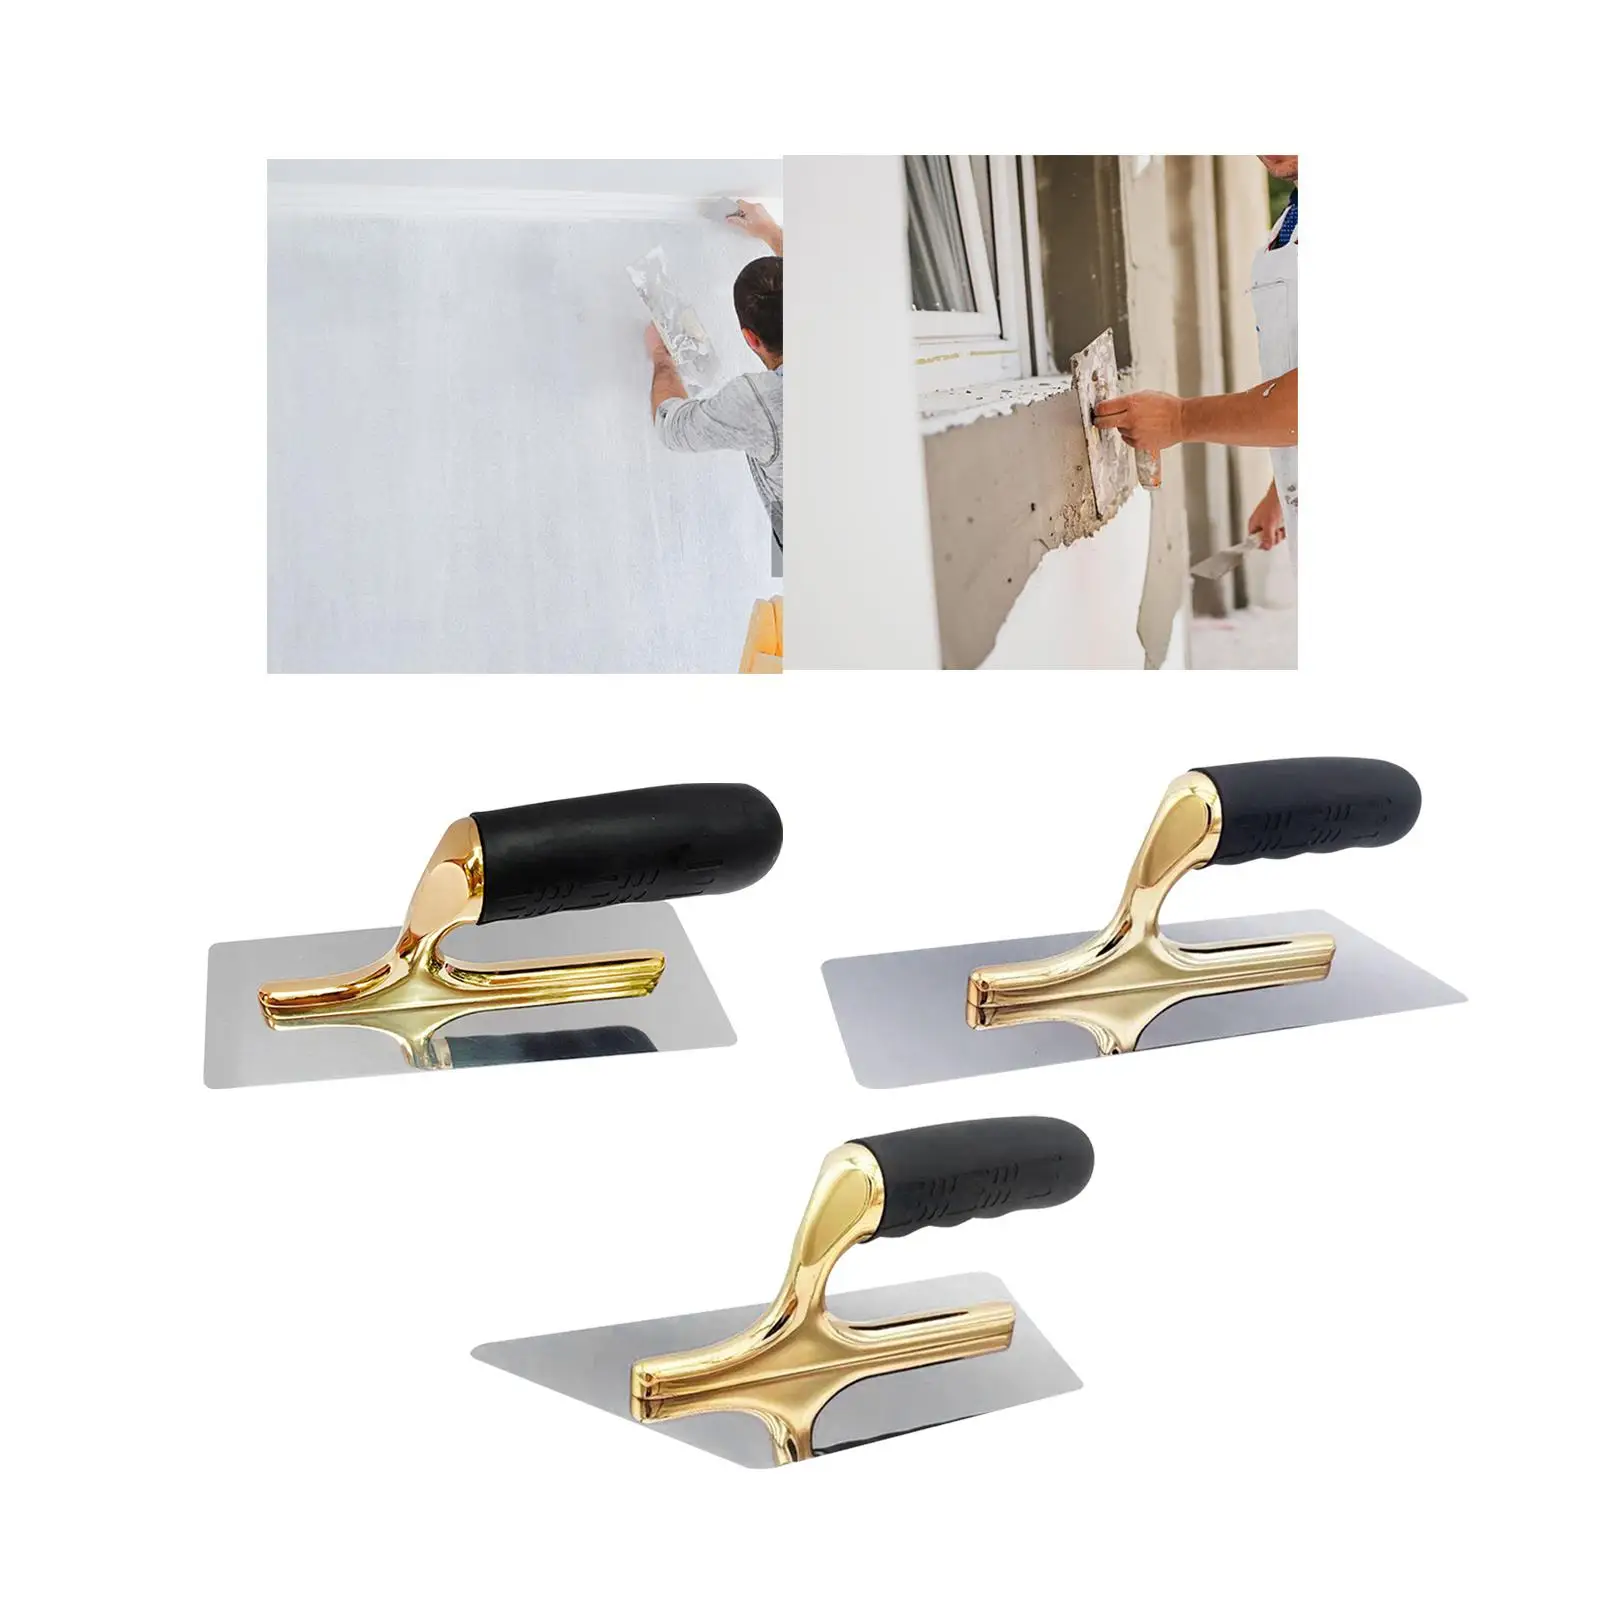 Plaster Cement Putty Scraper Soft Handle for Wall Construction Cement Stucco